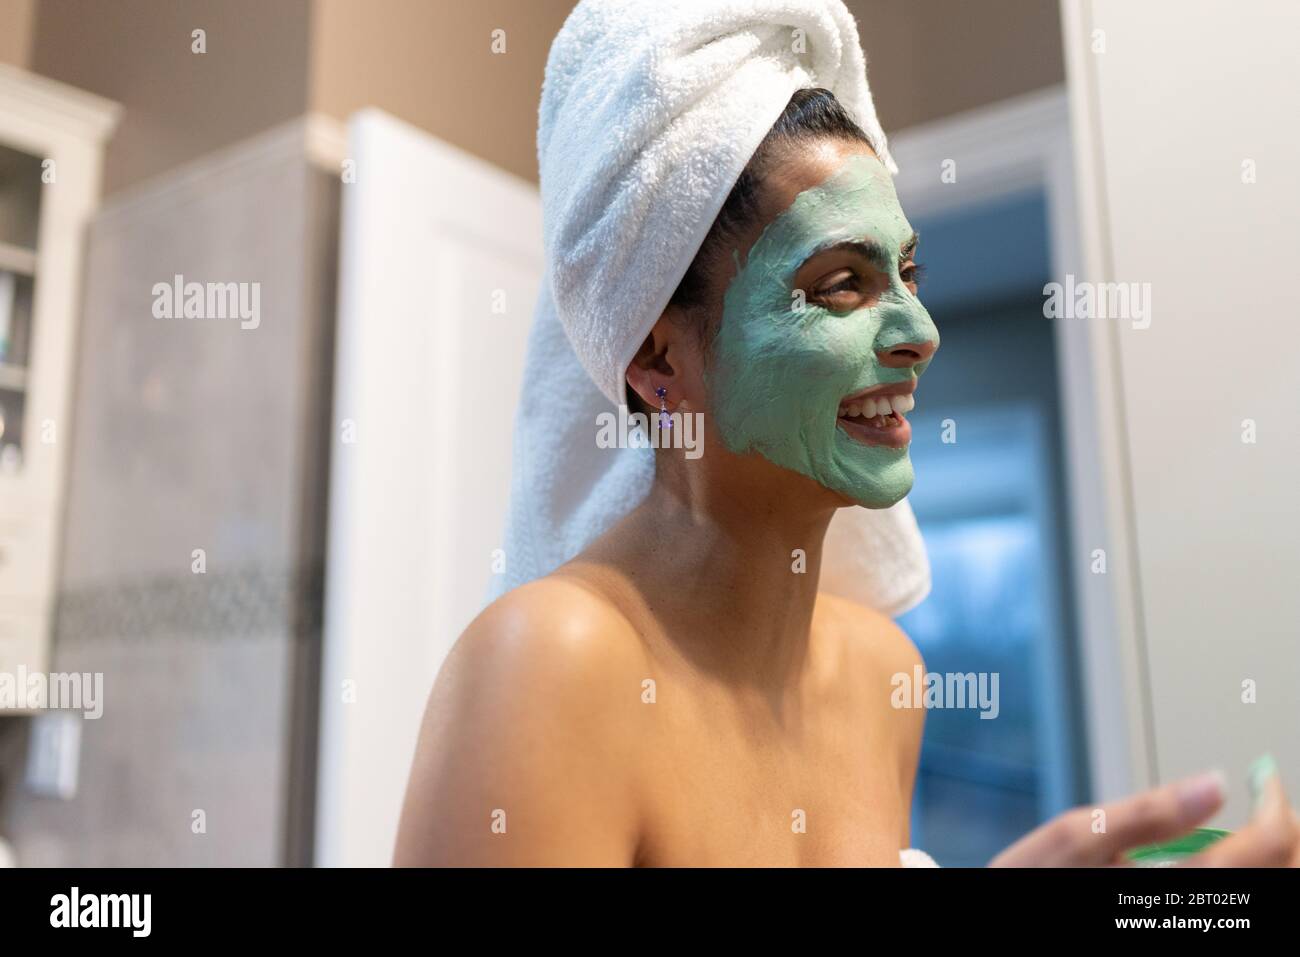 Woman standing in bathroom, applying face mask after bath. Stock Photo